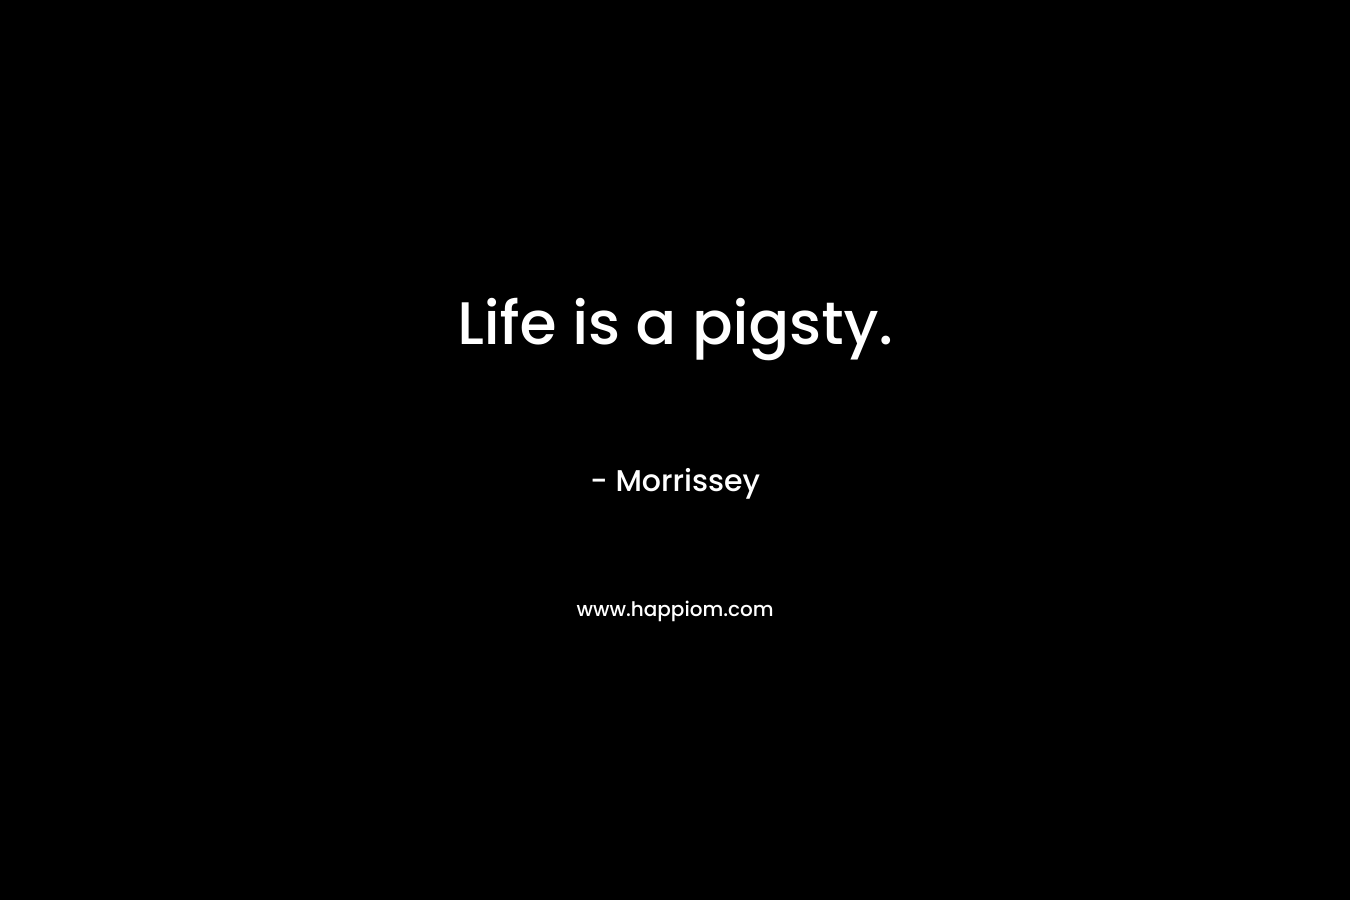 Life is a pigsty. – Morrissey